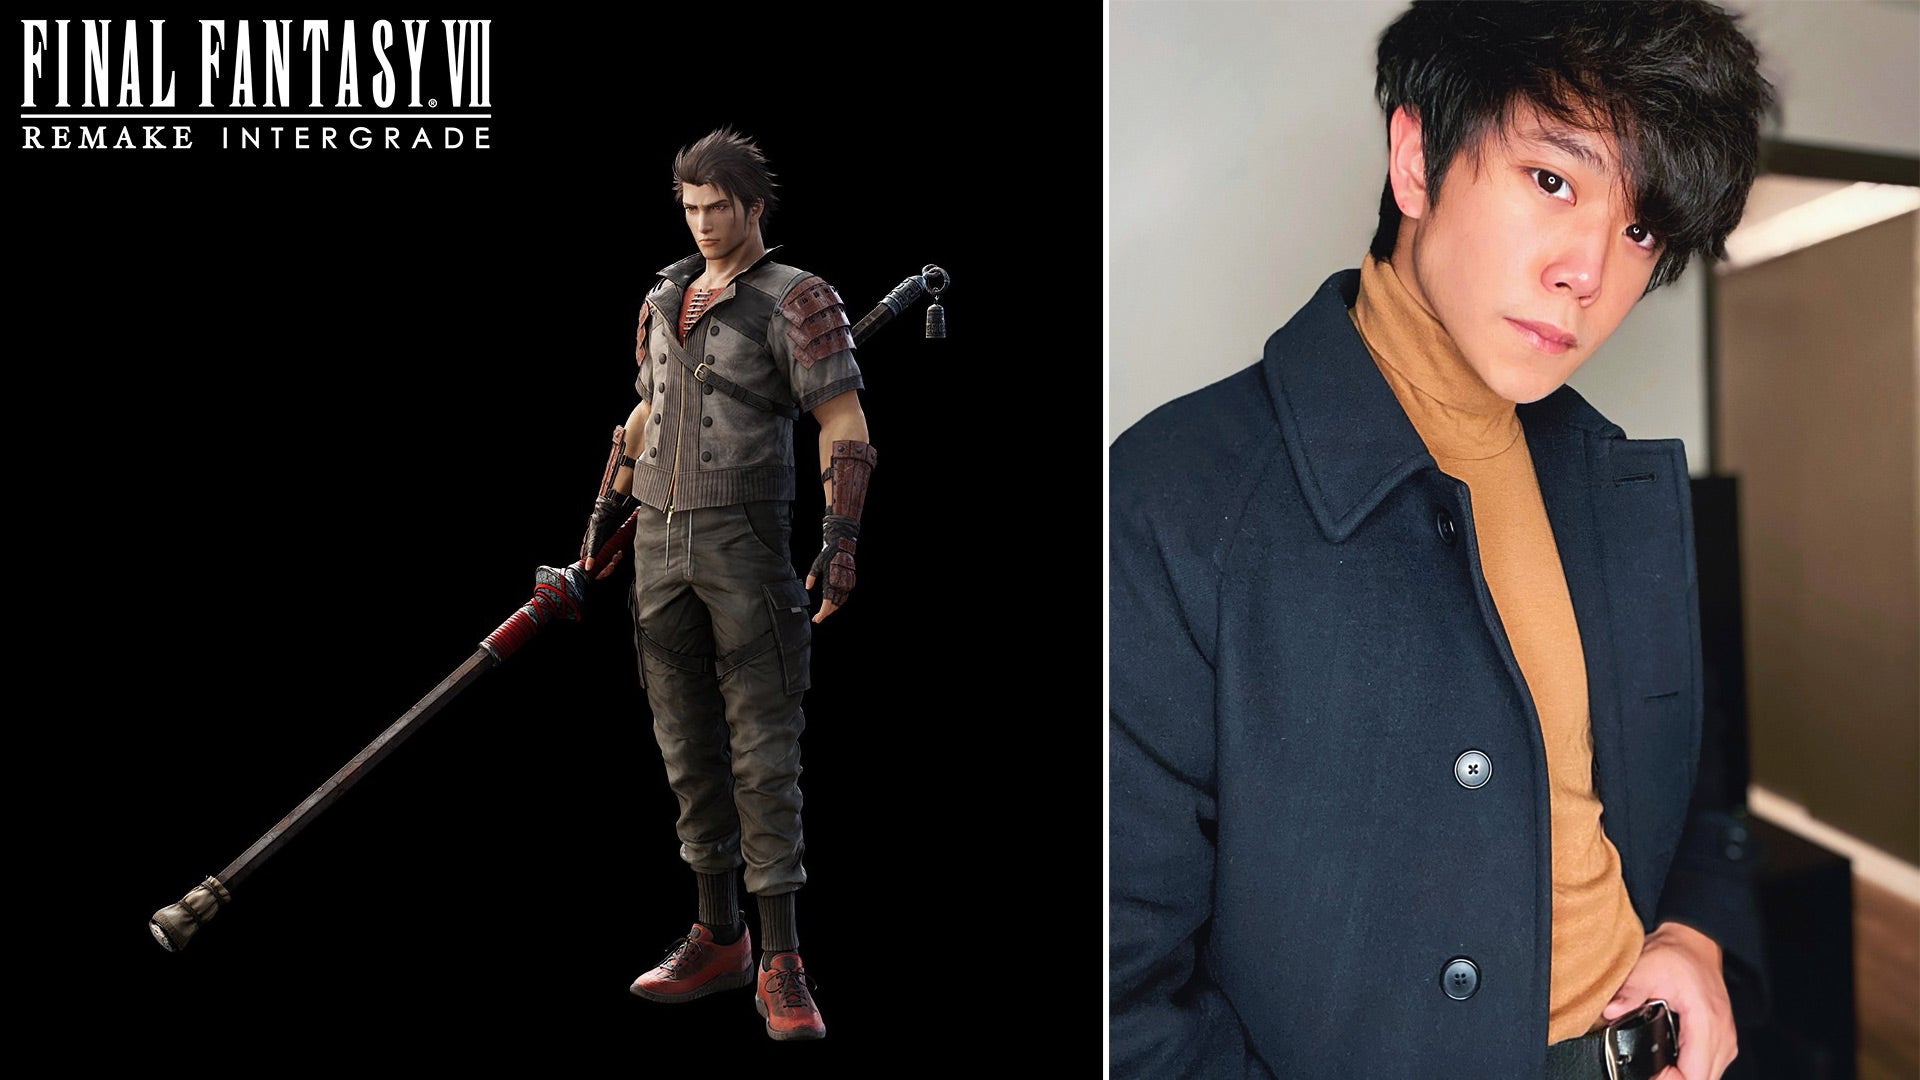 Aleks Le will portray Soson Kusakabe, Yuffie's new partner slash brother-in-arms. Le has quite the YouTube following. (Image: Square Enix / Aleks Le)